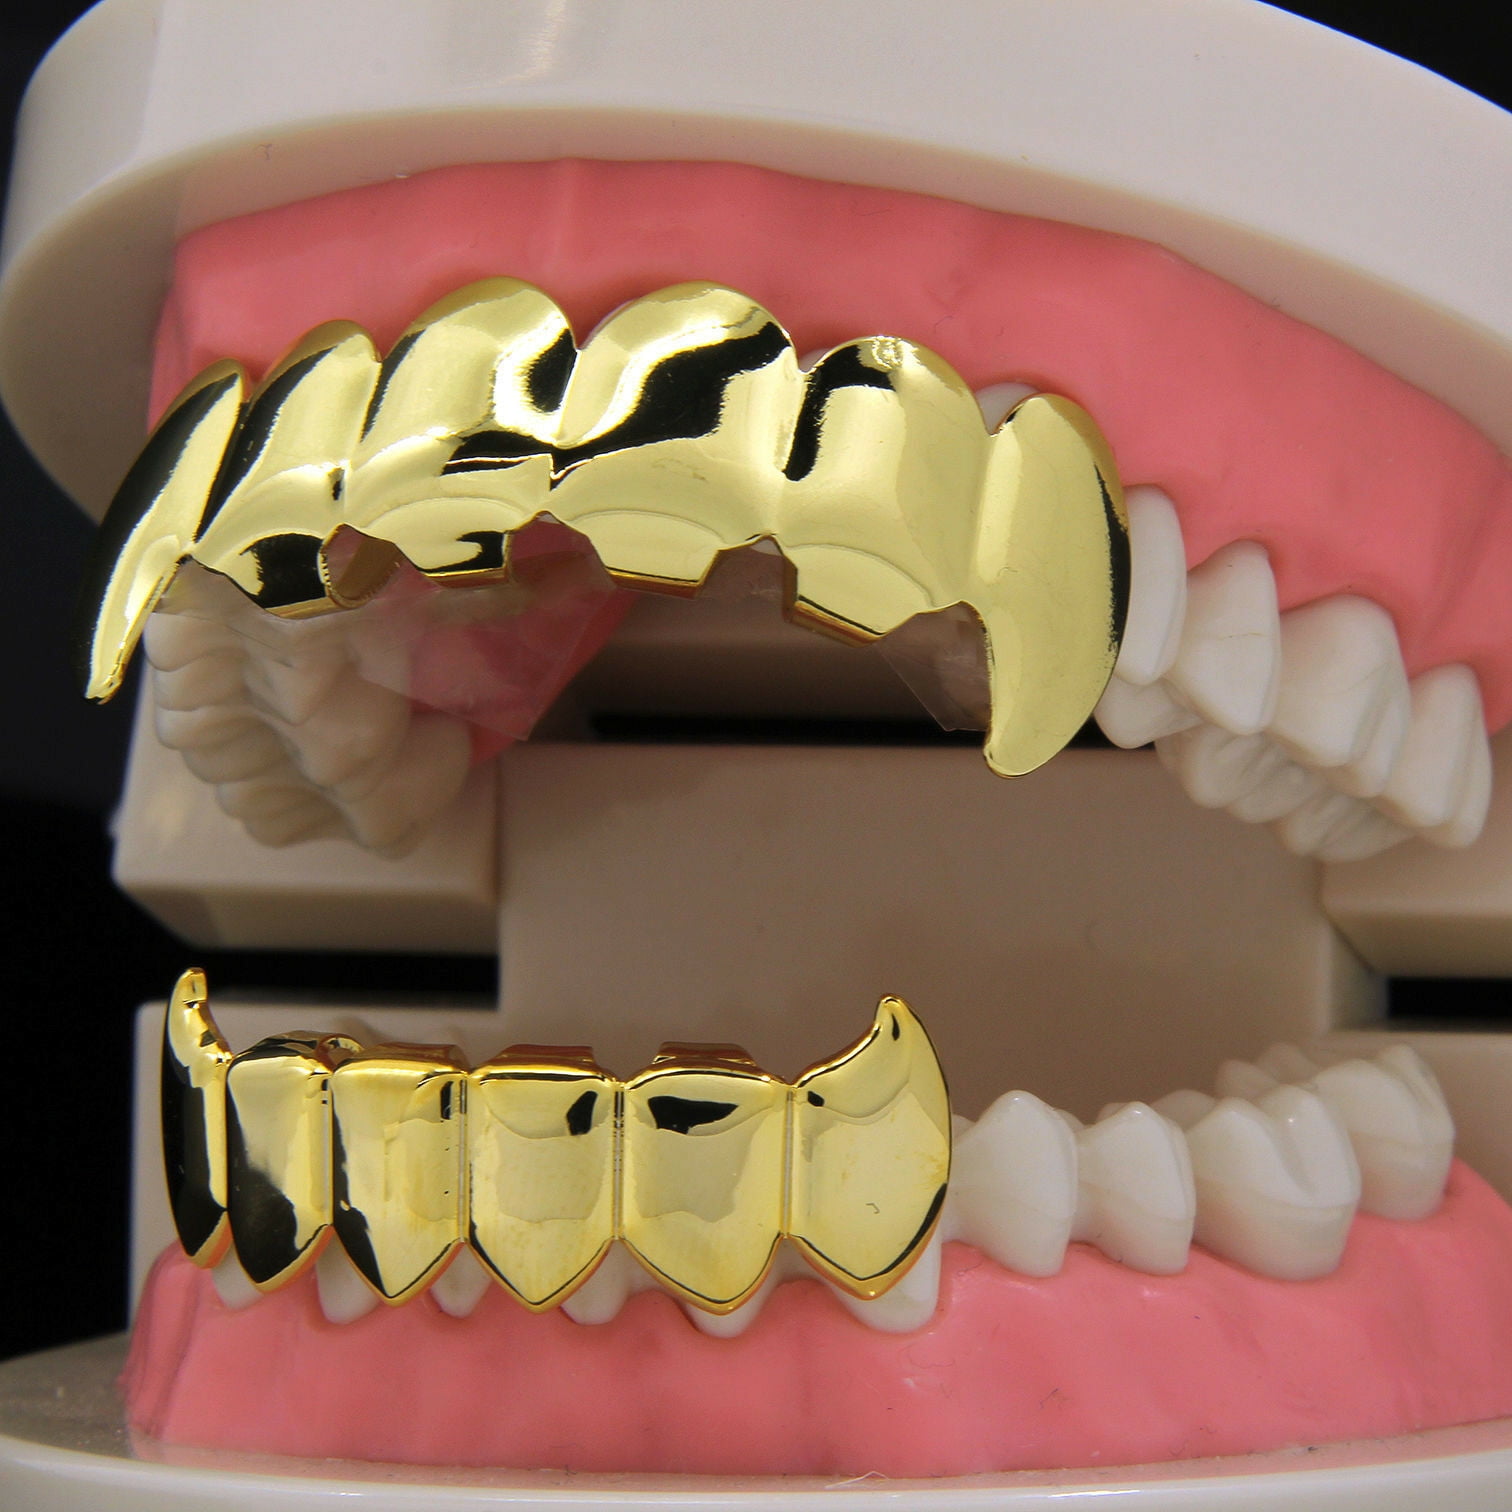 fit 14K Gold Plated Hip Hop Teeth Grills Caps Top OR Bottom Teeth Grill 